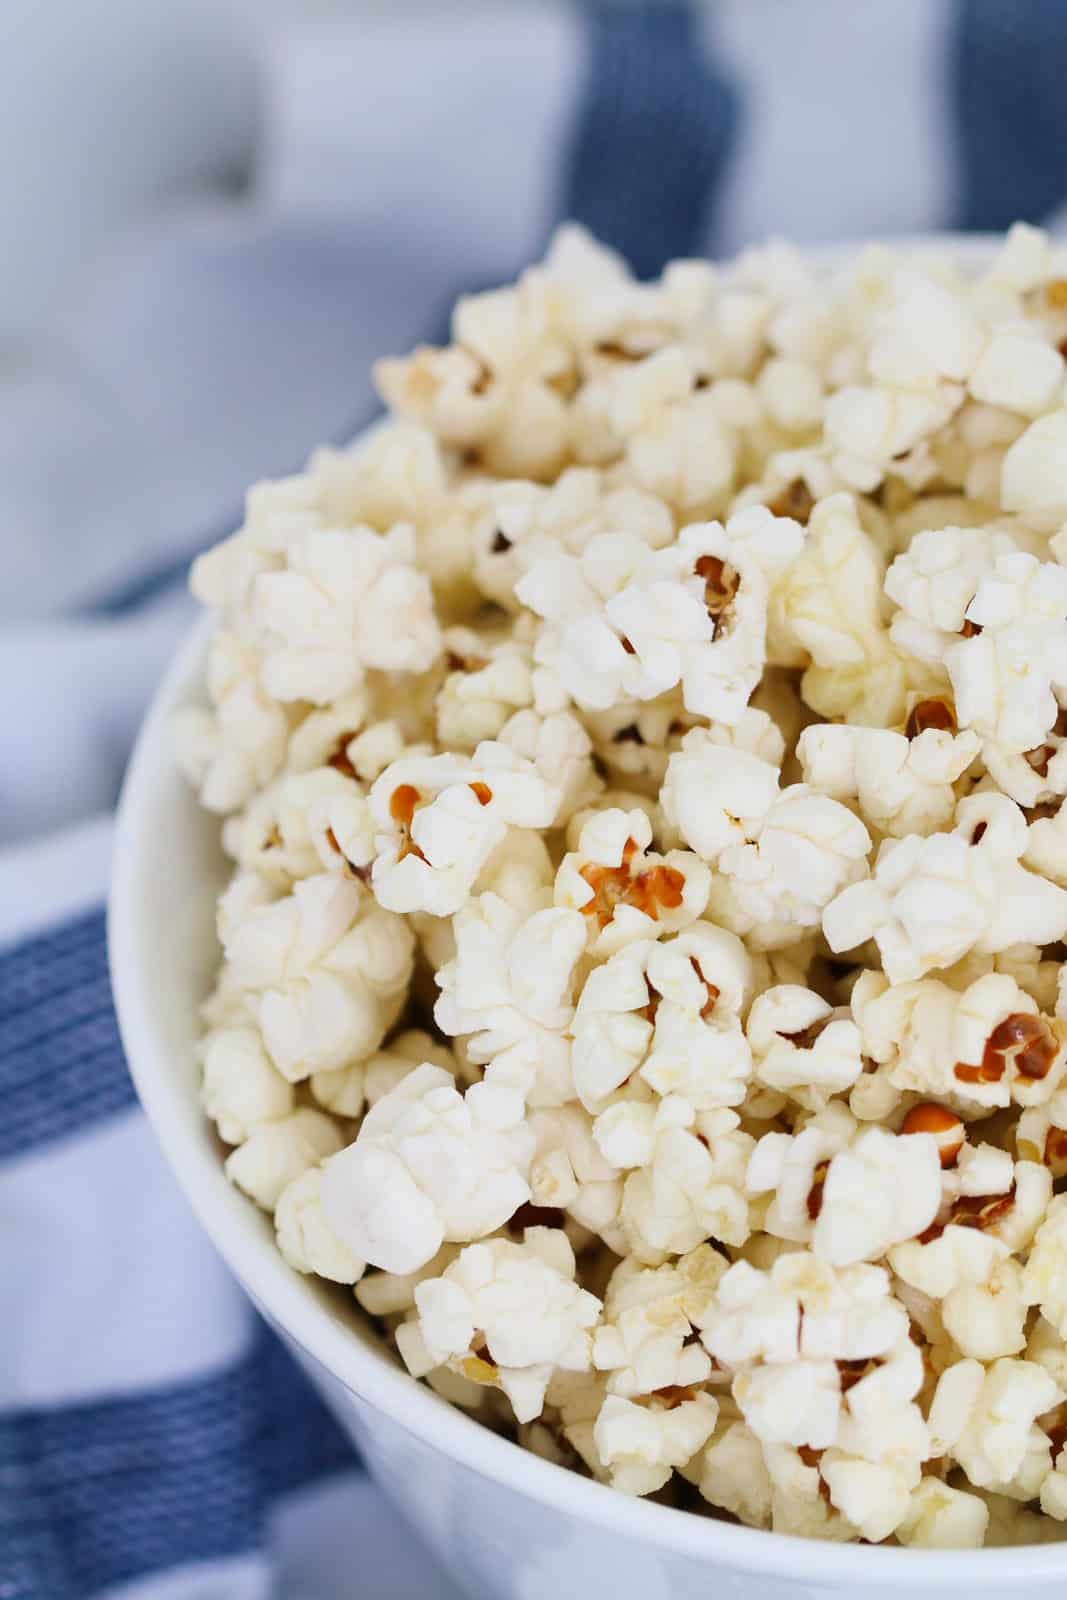 An overhead shot of a white bowl of popcorn on a white and blue tea towel.